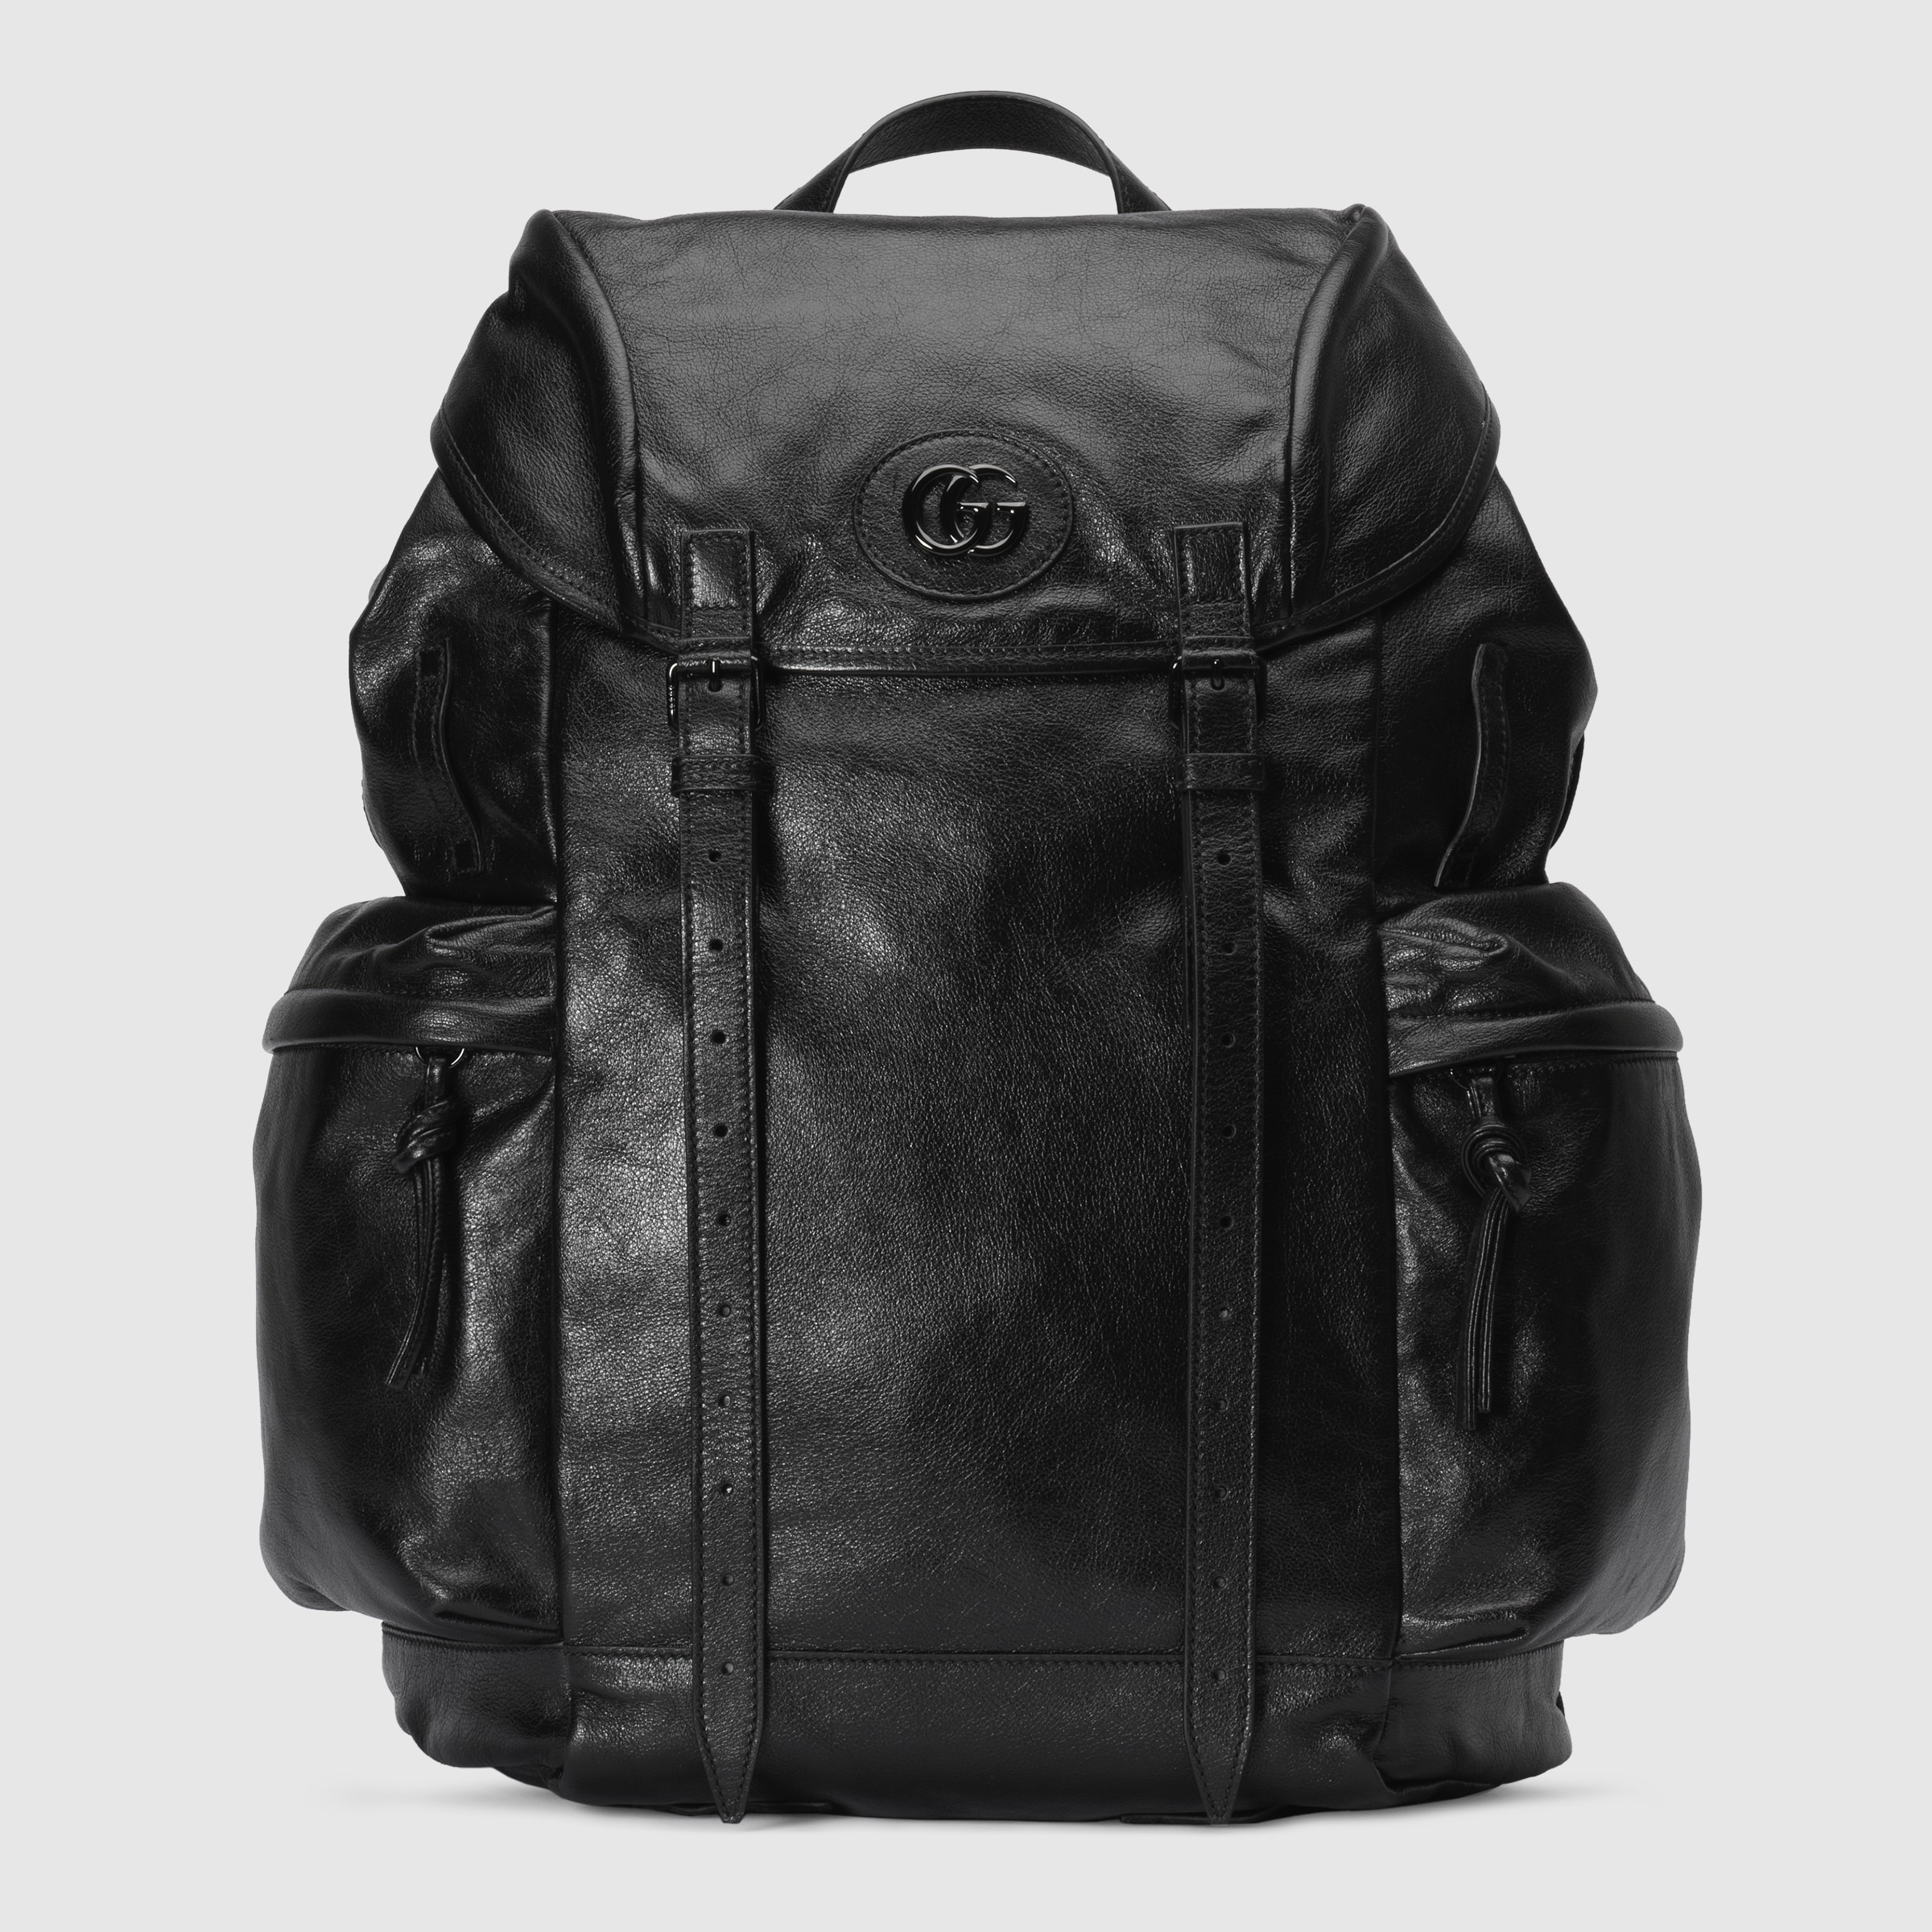 Gucci backpack with tonal double g